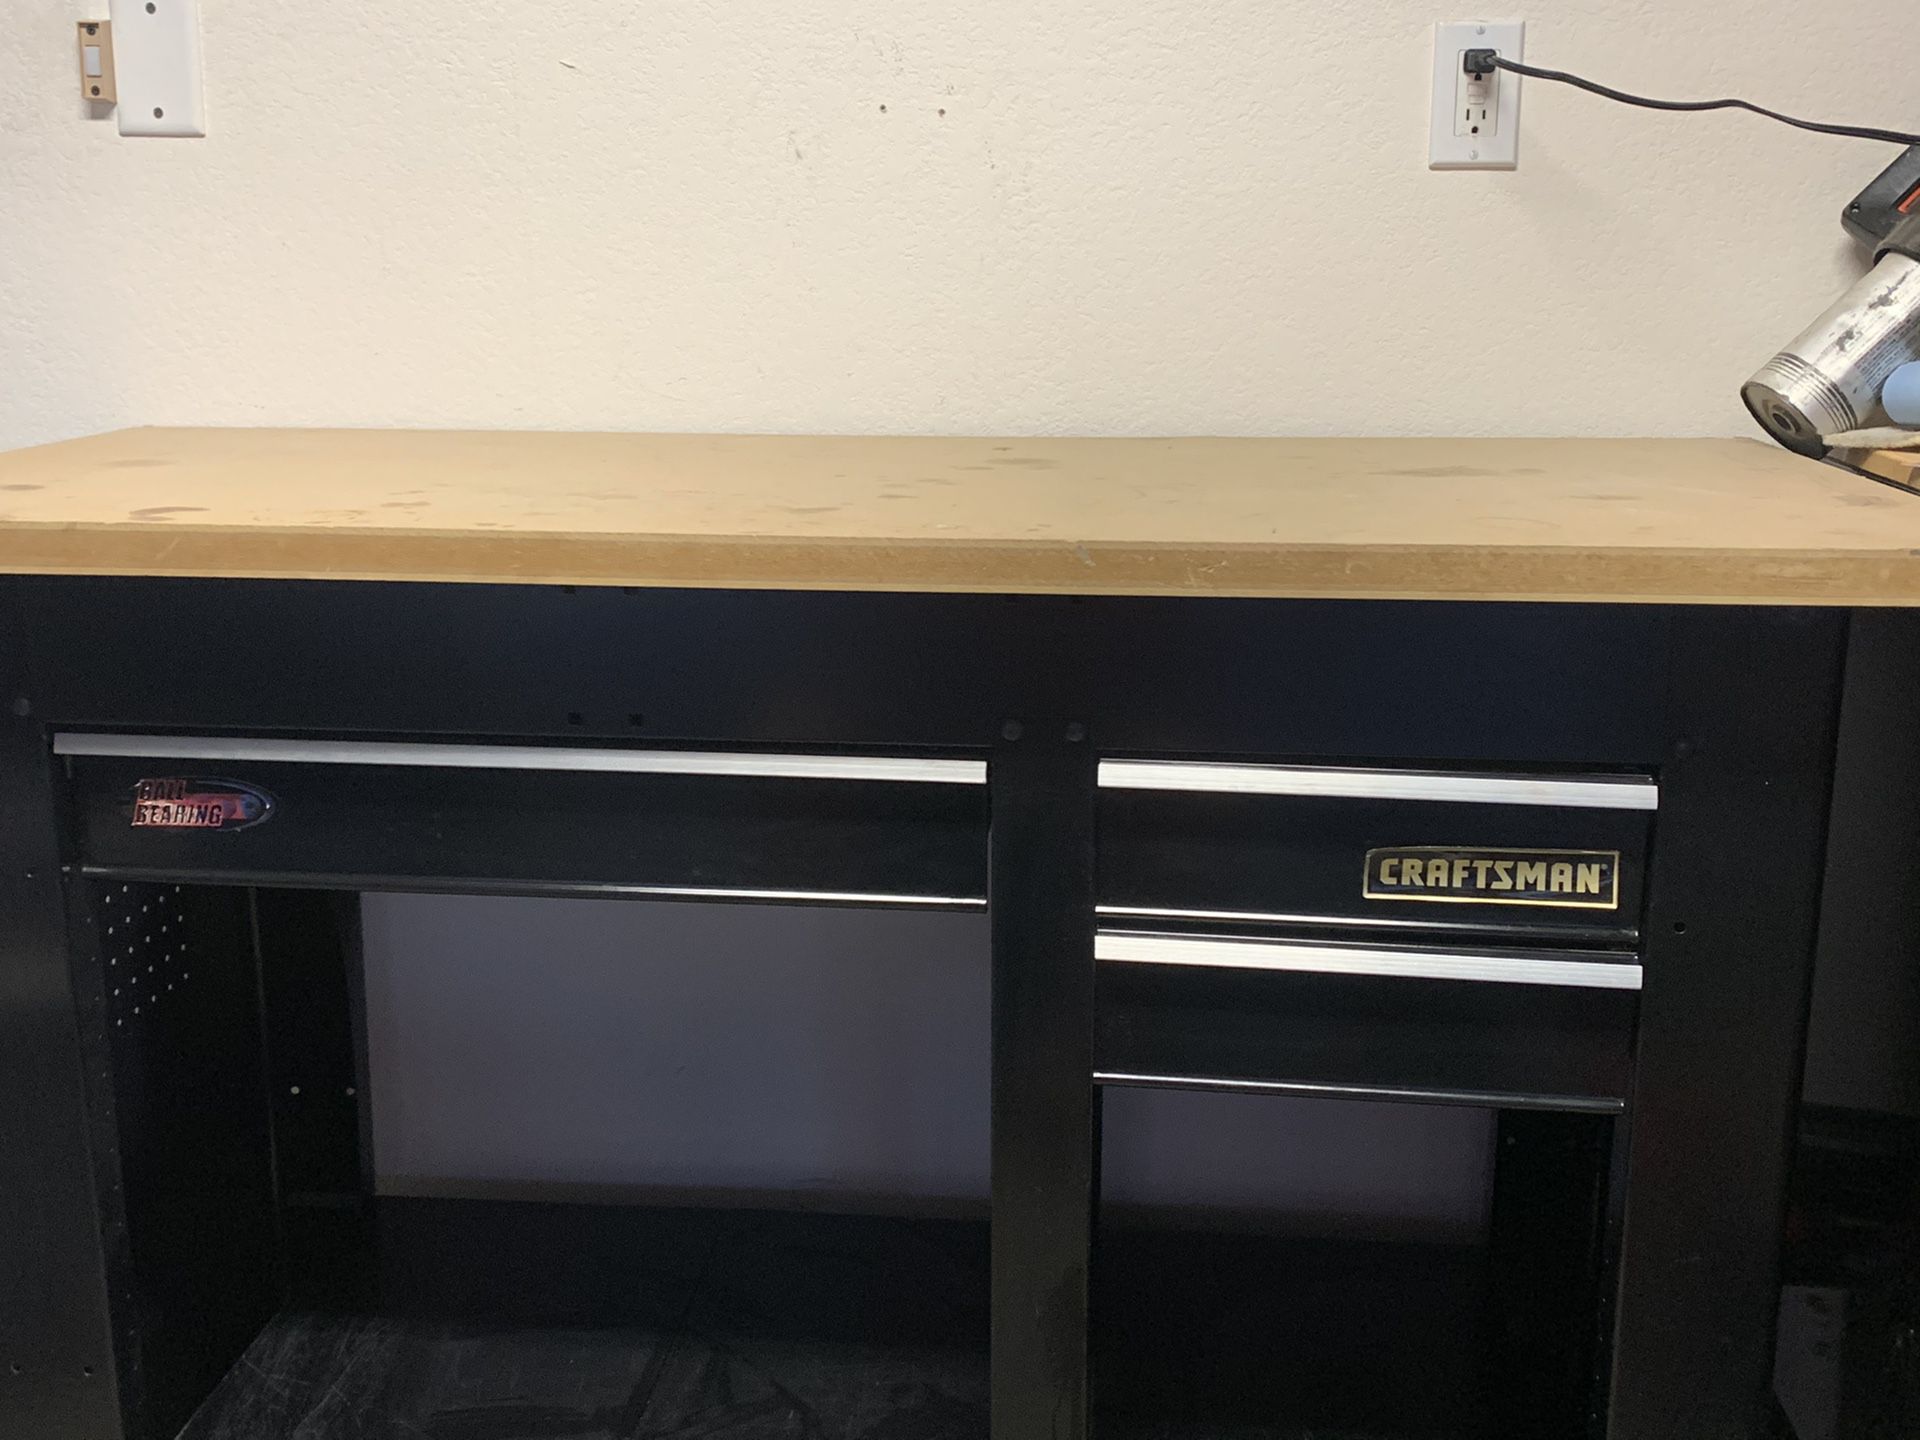 Craftsman work bench with 3 drawers